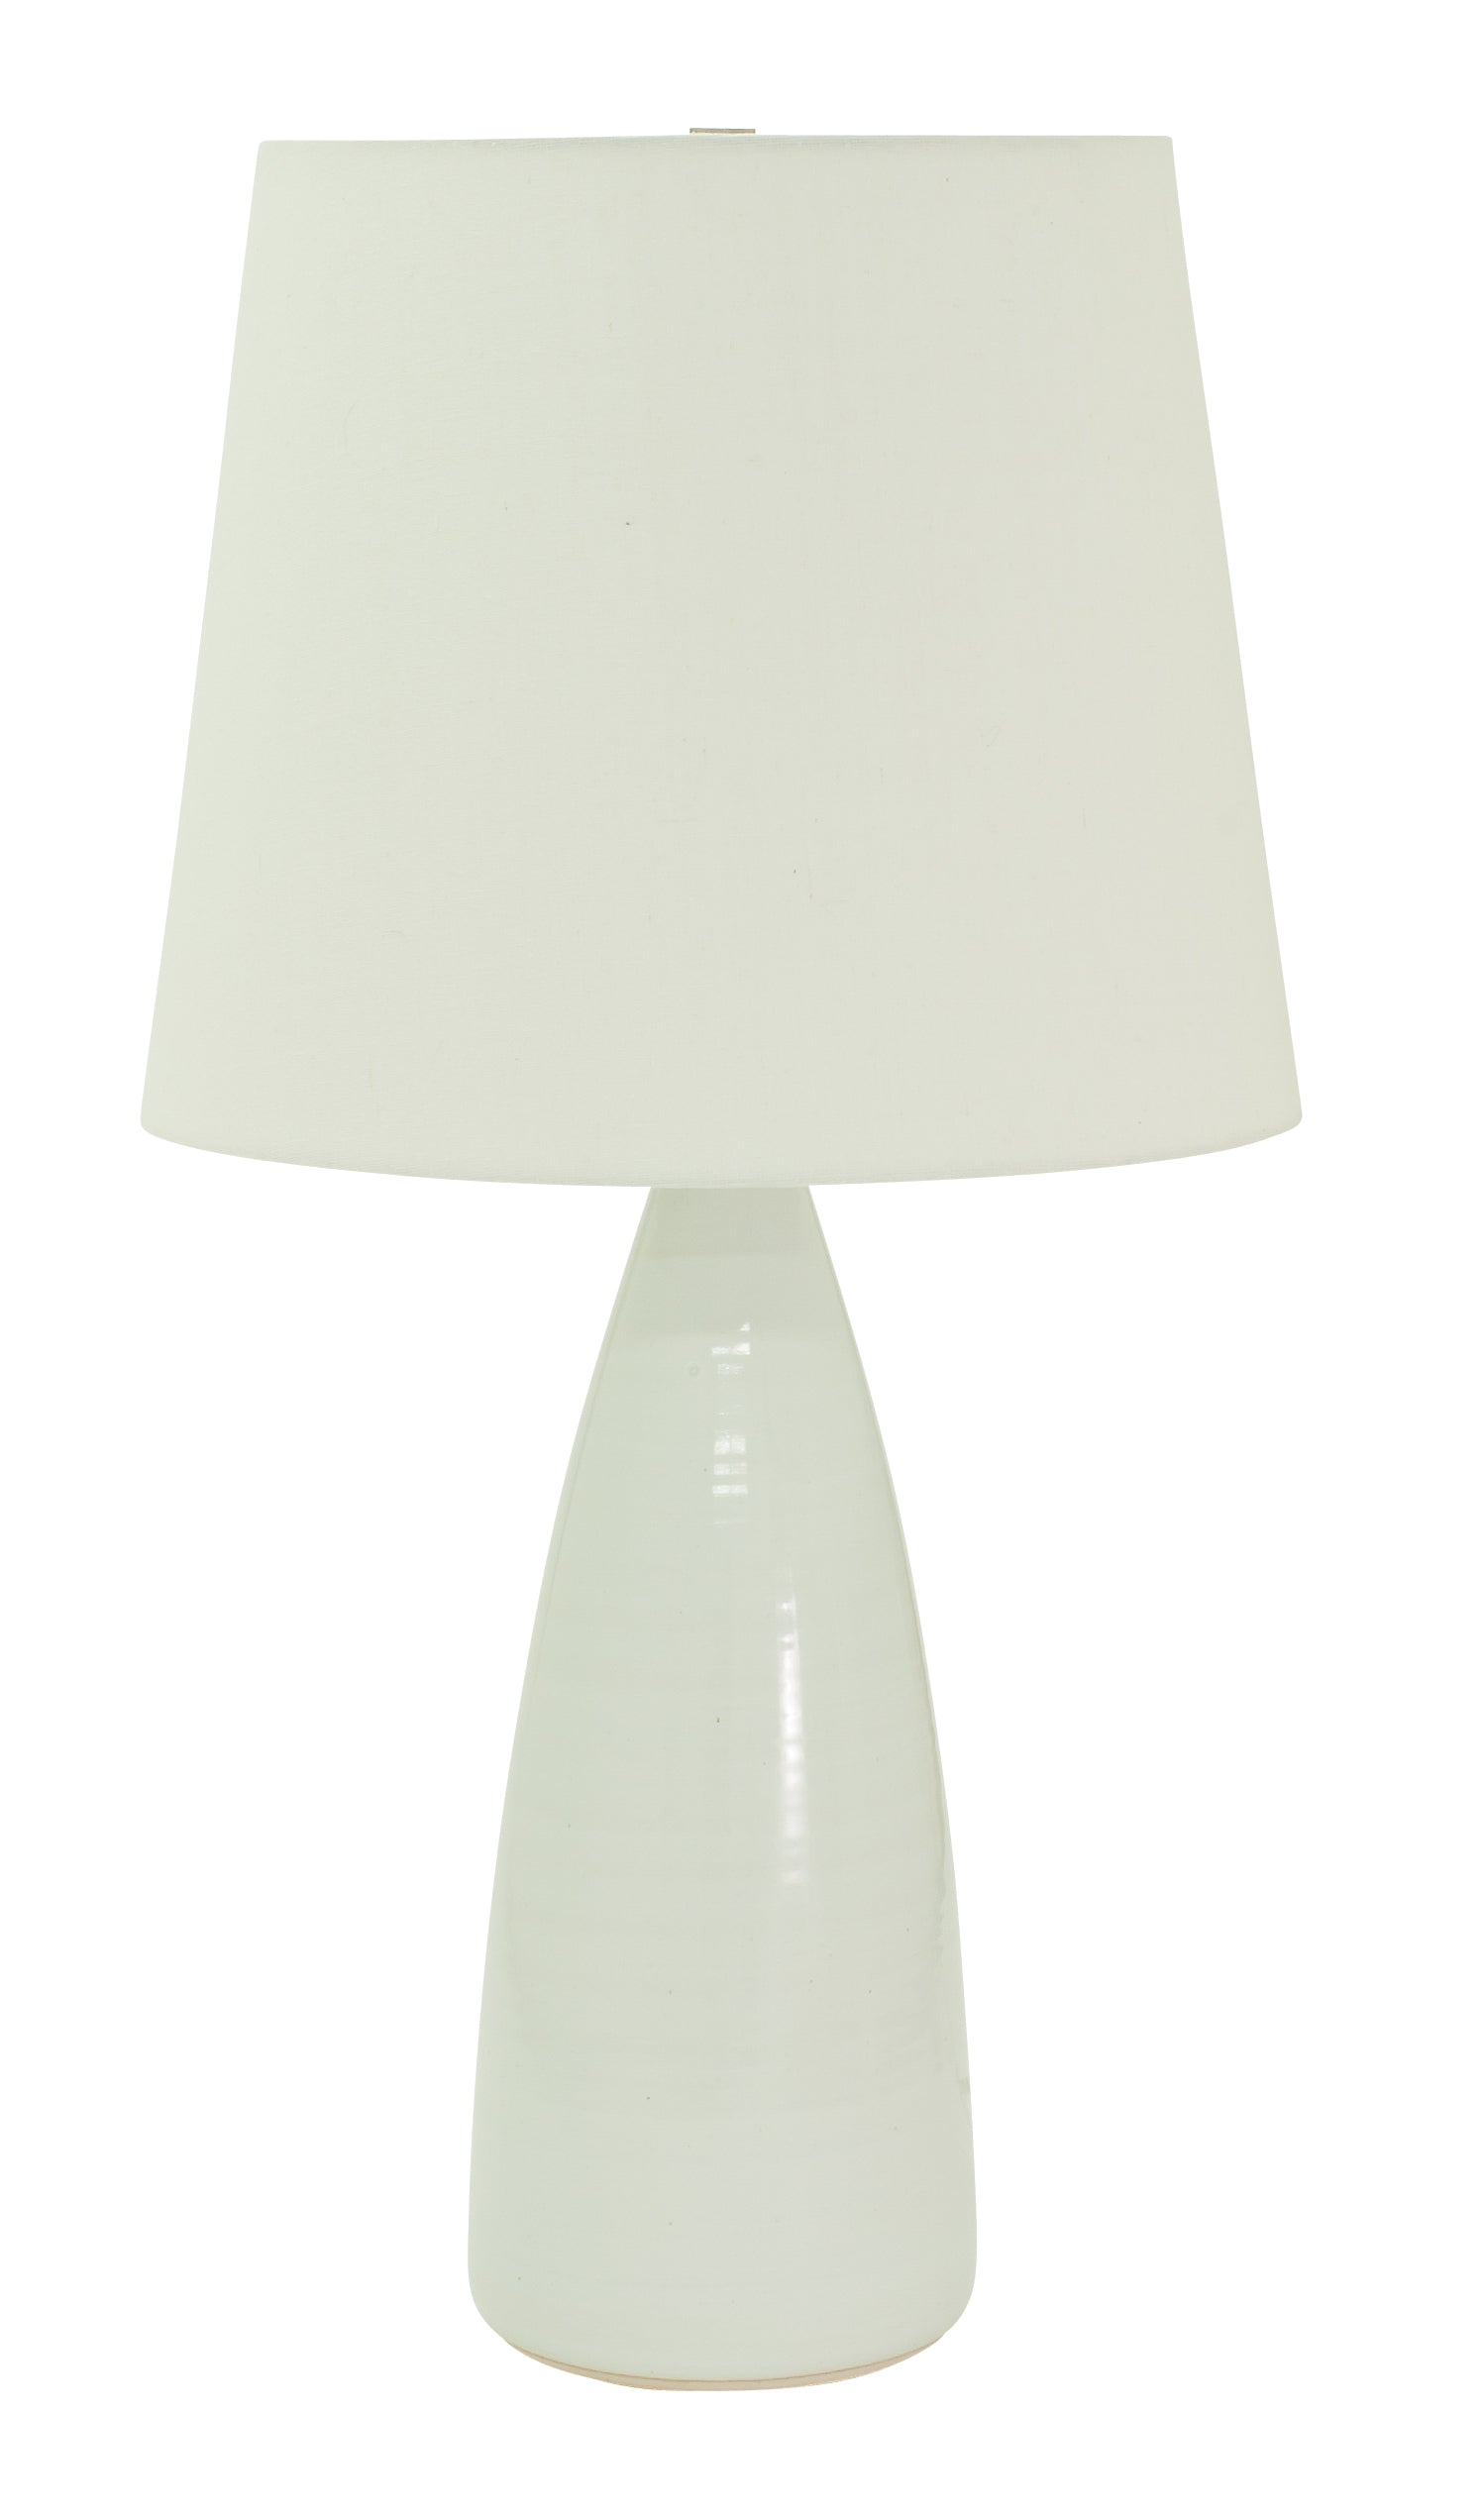 House of Troy Scatchard 25.5" Stoneware Table Lamp in White Gloss GS850-WG